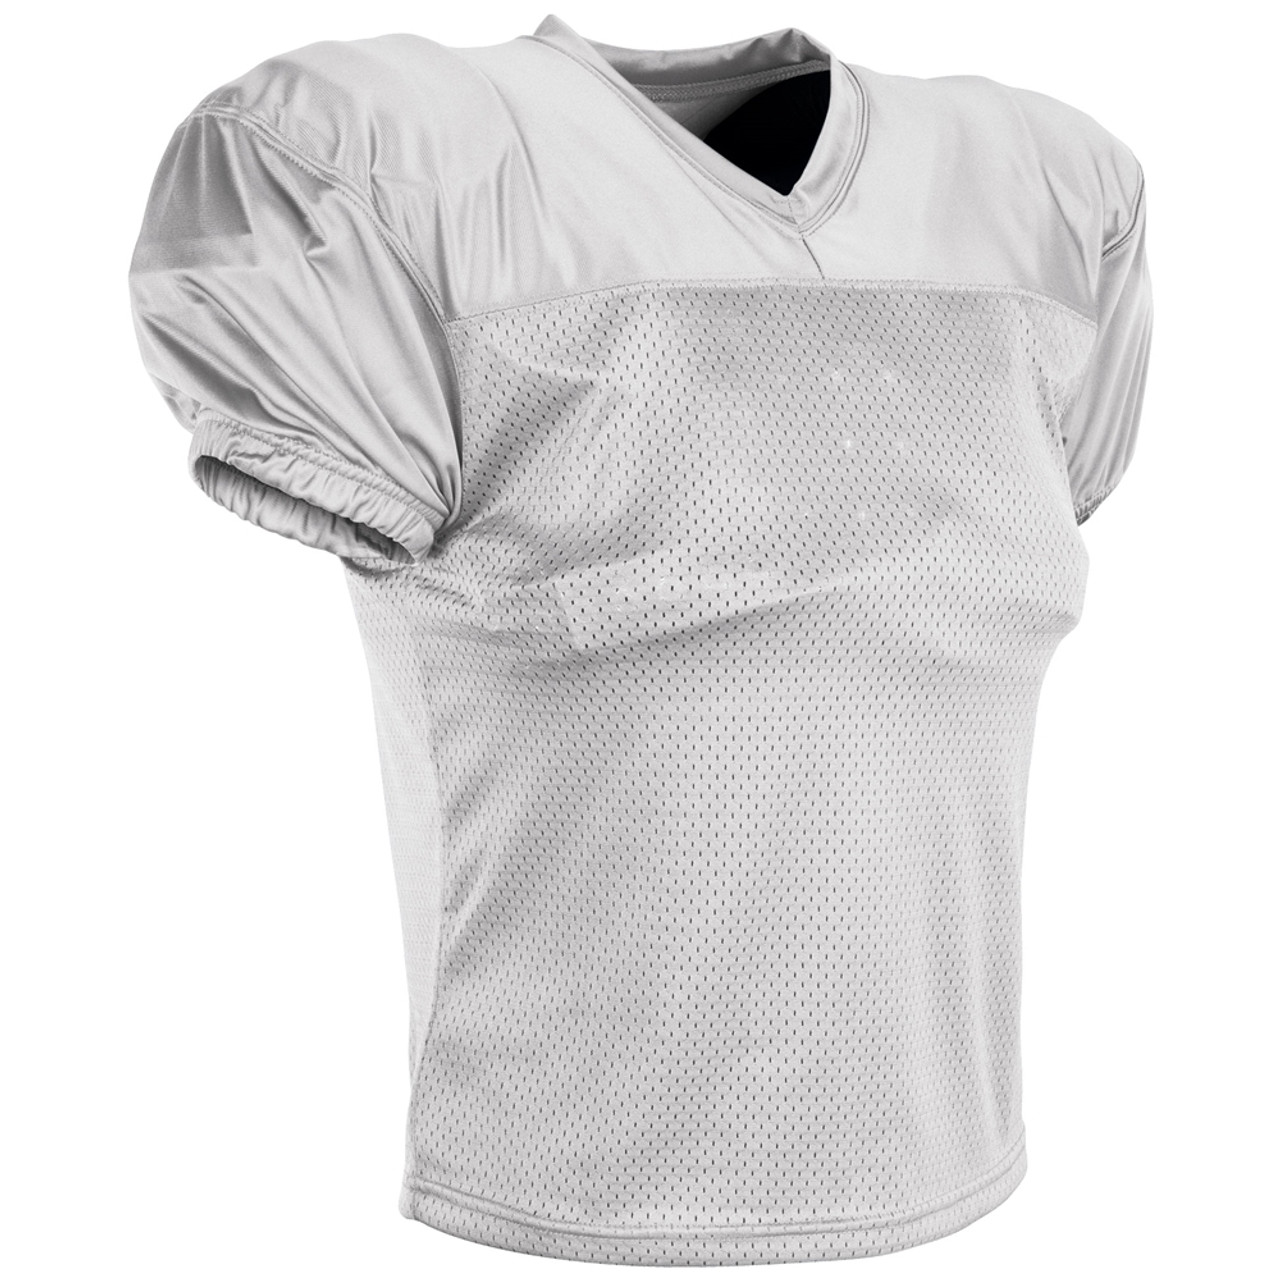 Rawlings Adult Practice Football Jersey, White / S